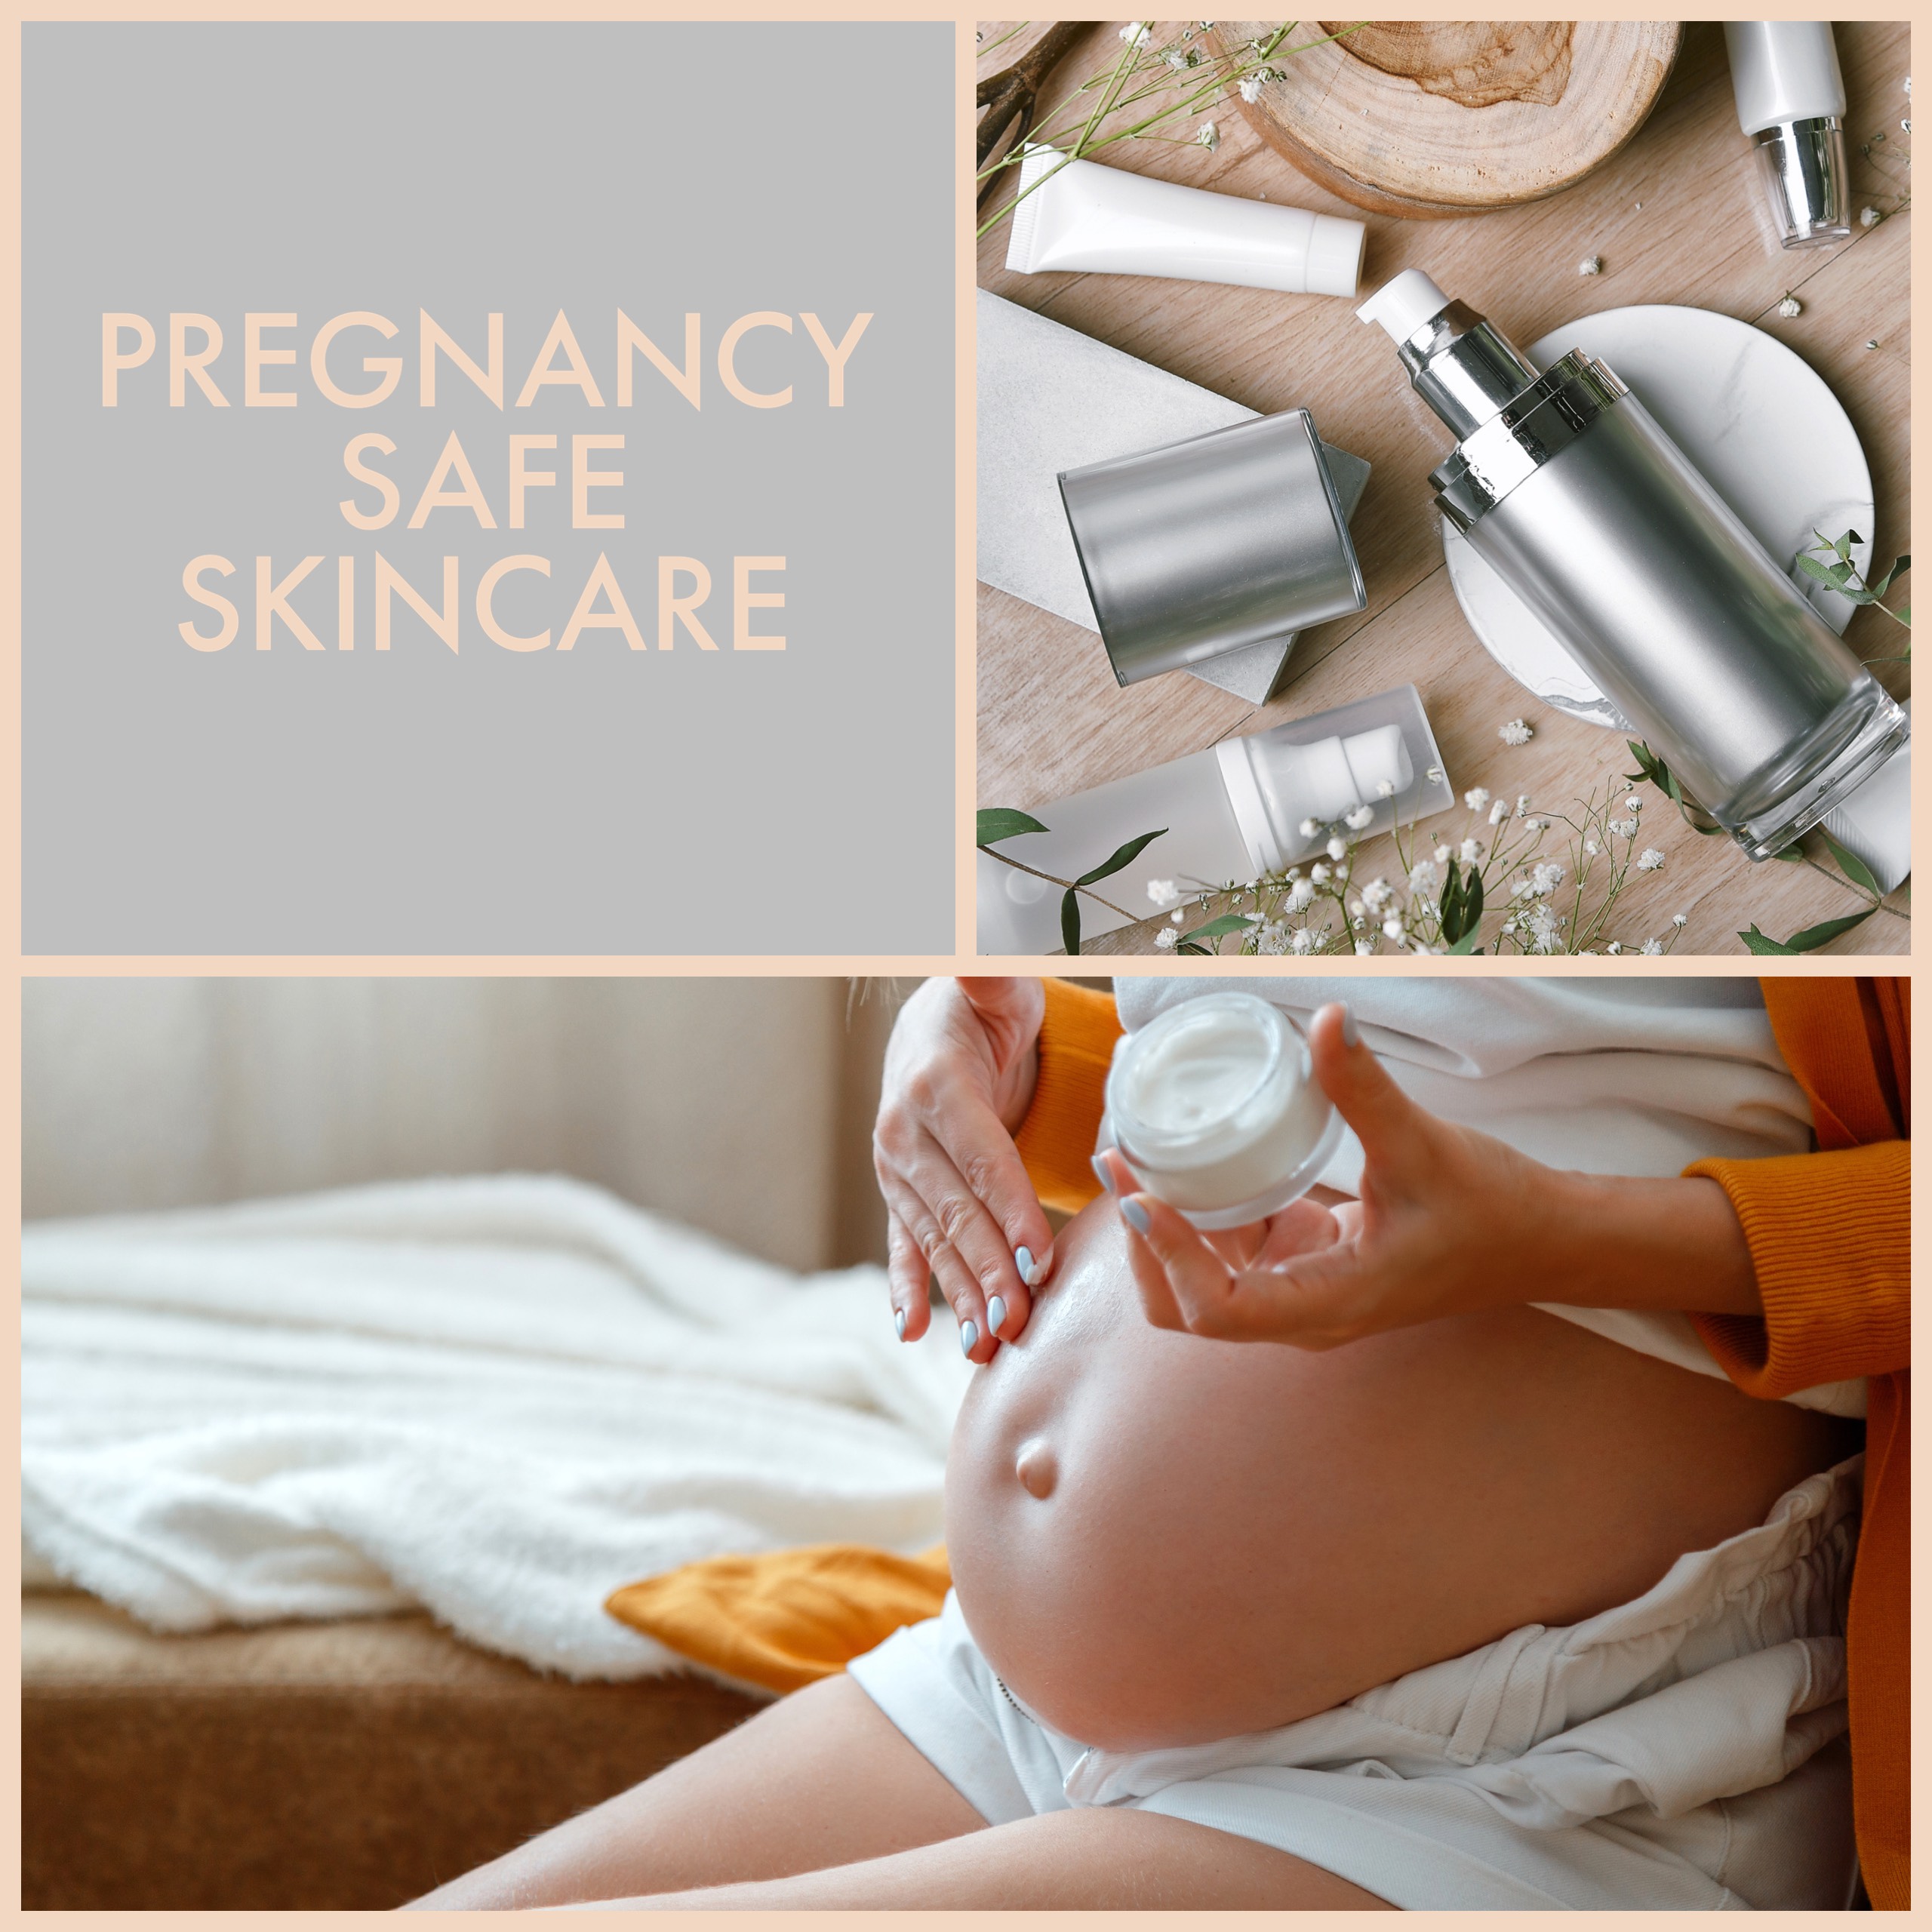 Pregnancy Safe Skincare: Tips for Keeping Your Skin Healthy During Pregnancy